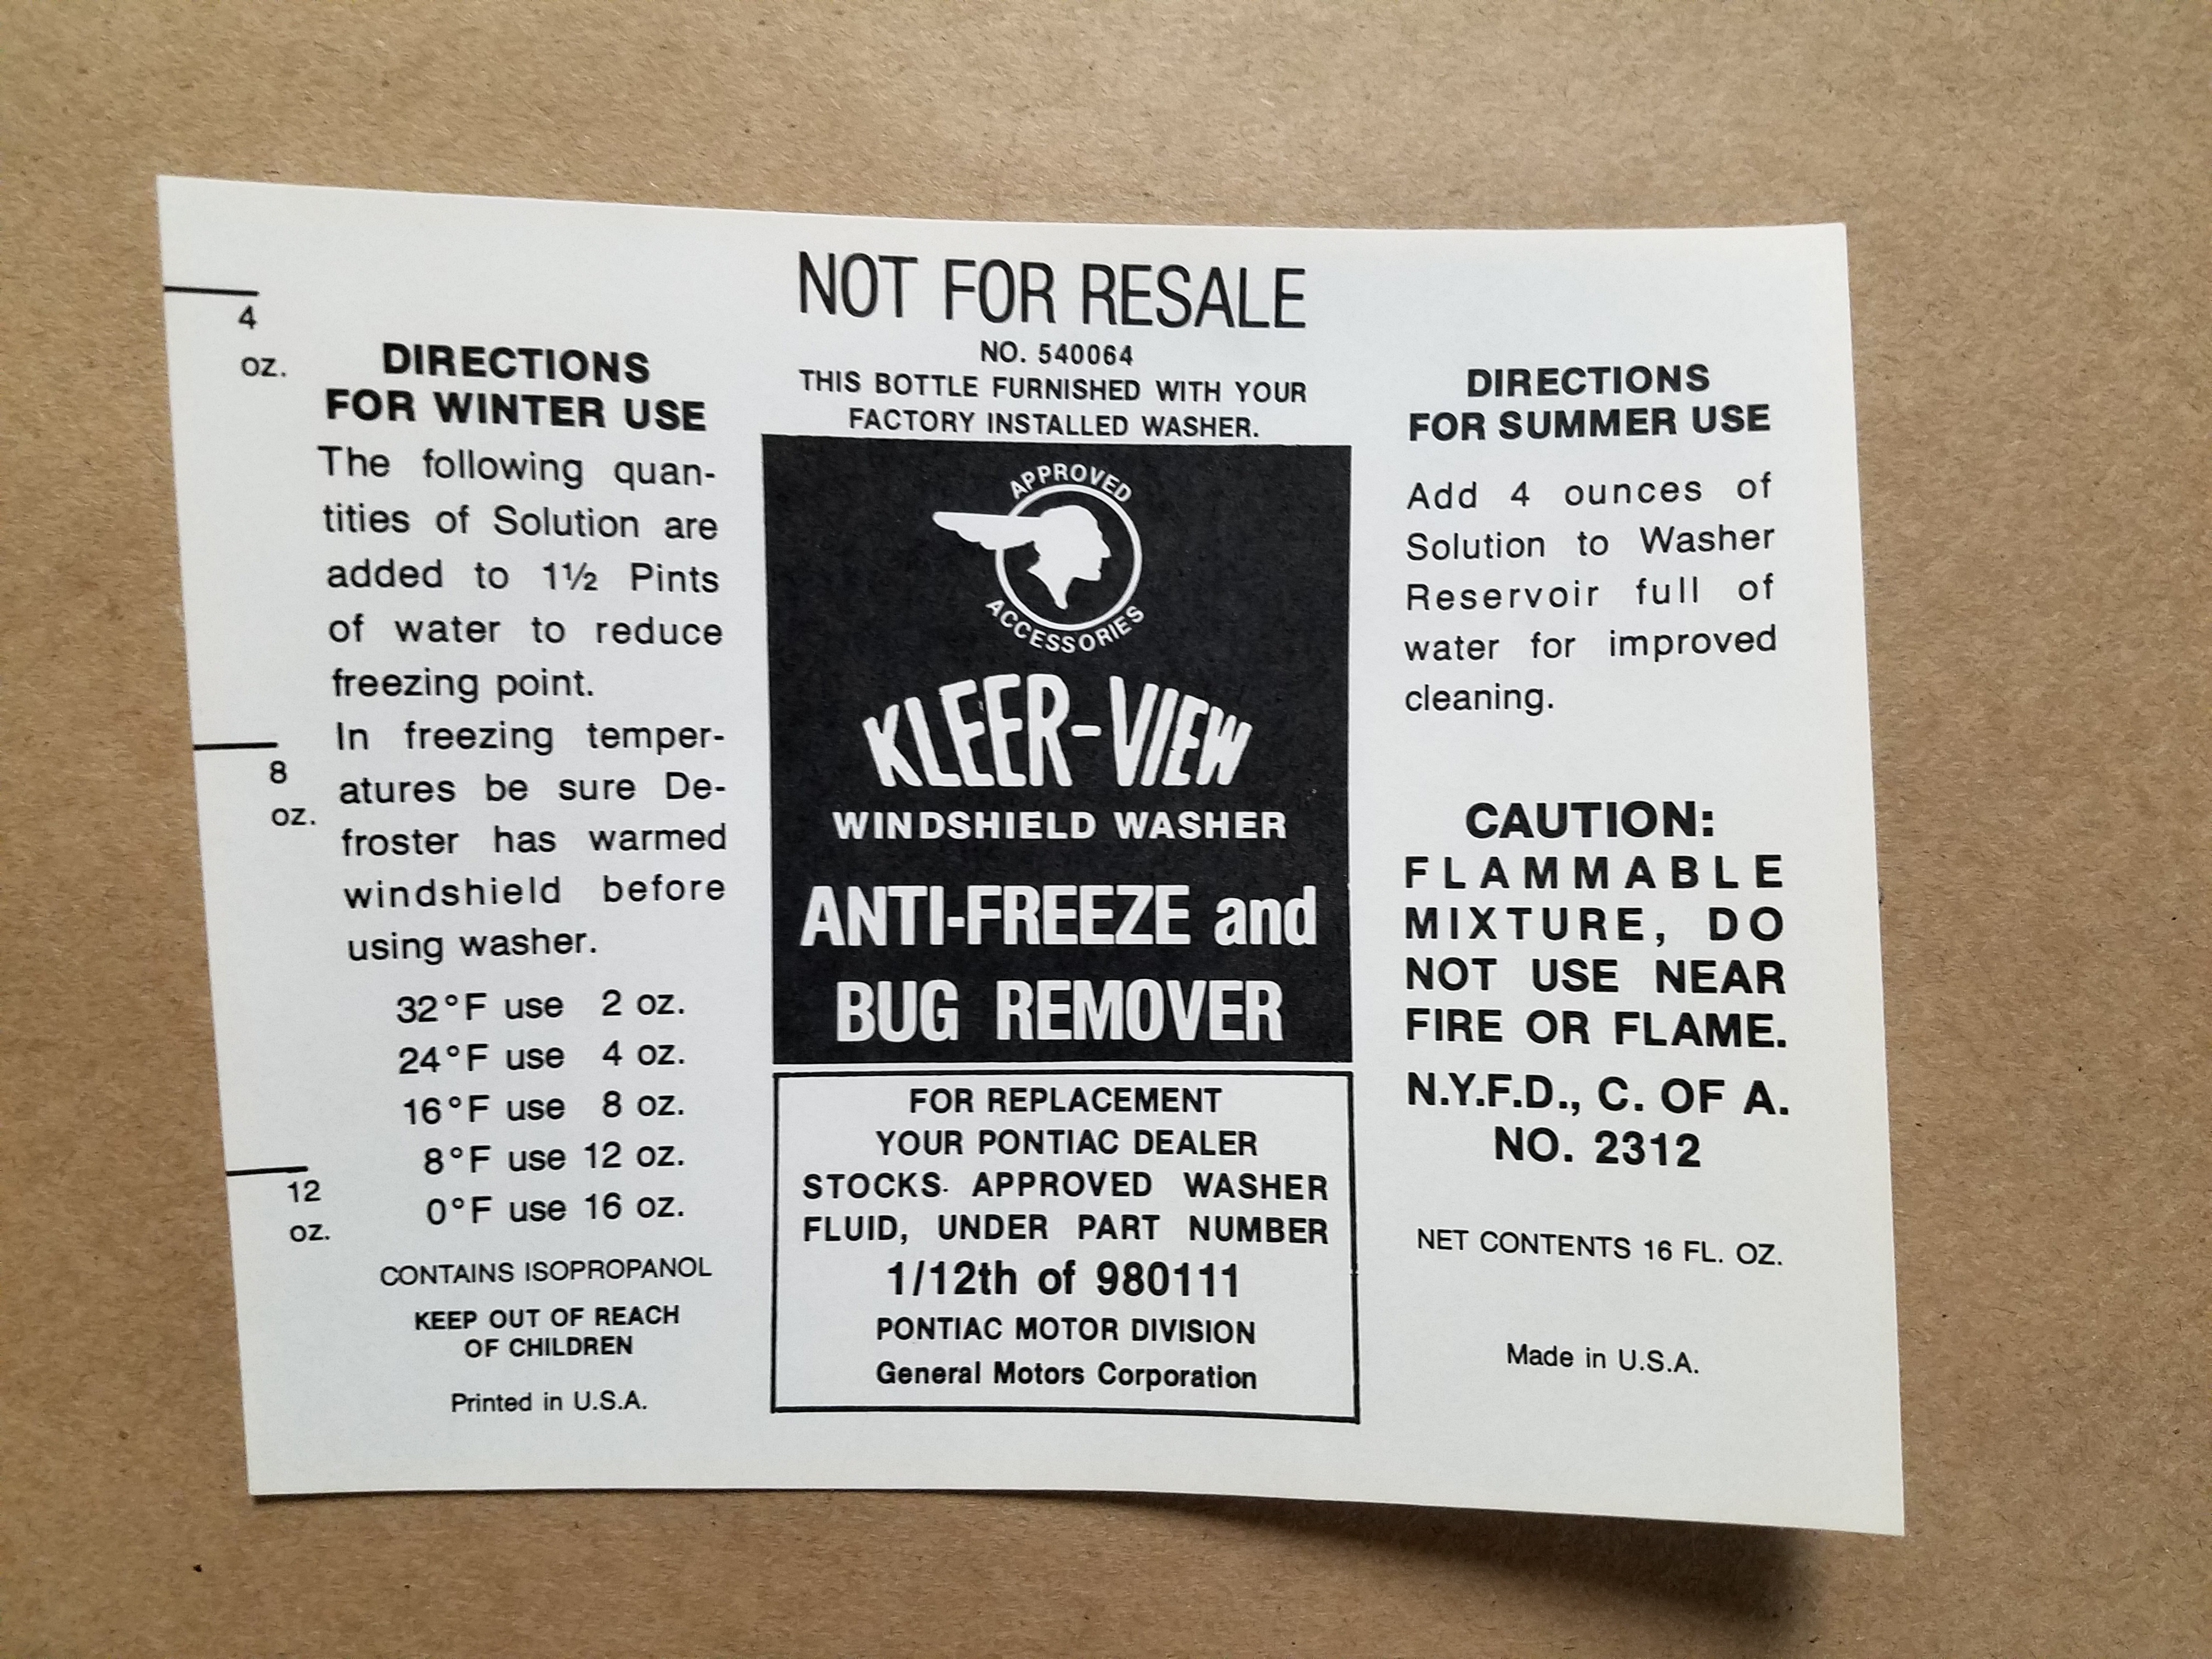 1961-69 Decal, Kleer-View Windshield Washer (GM# 540064), 1961-69..